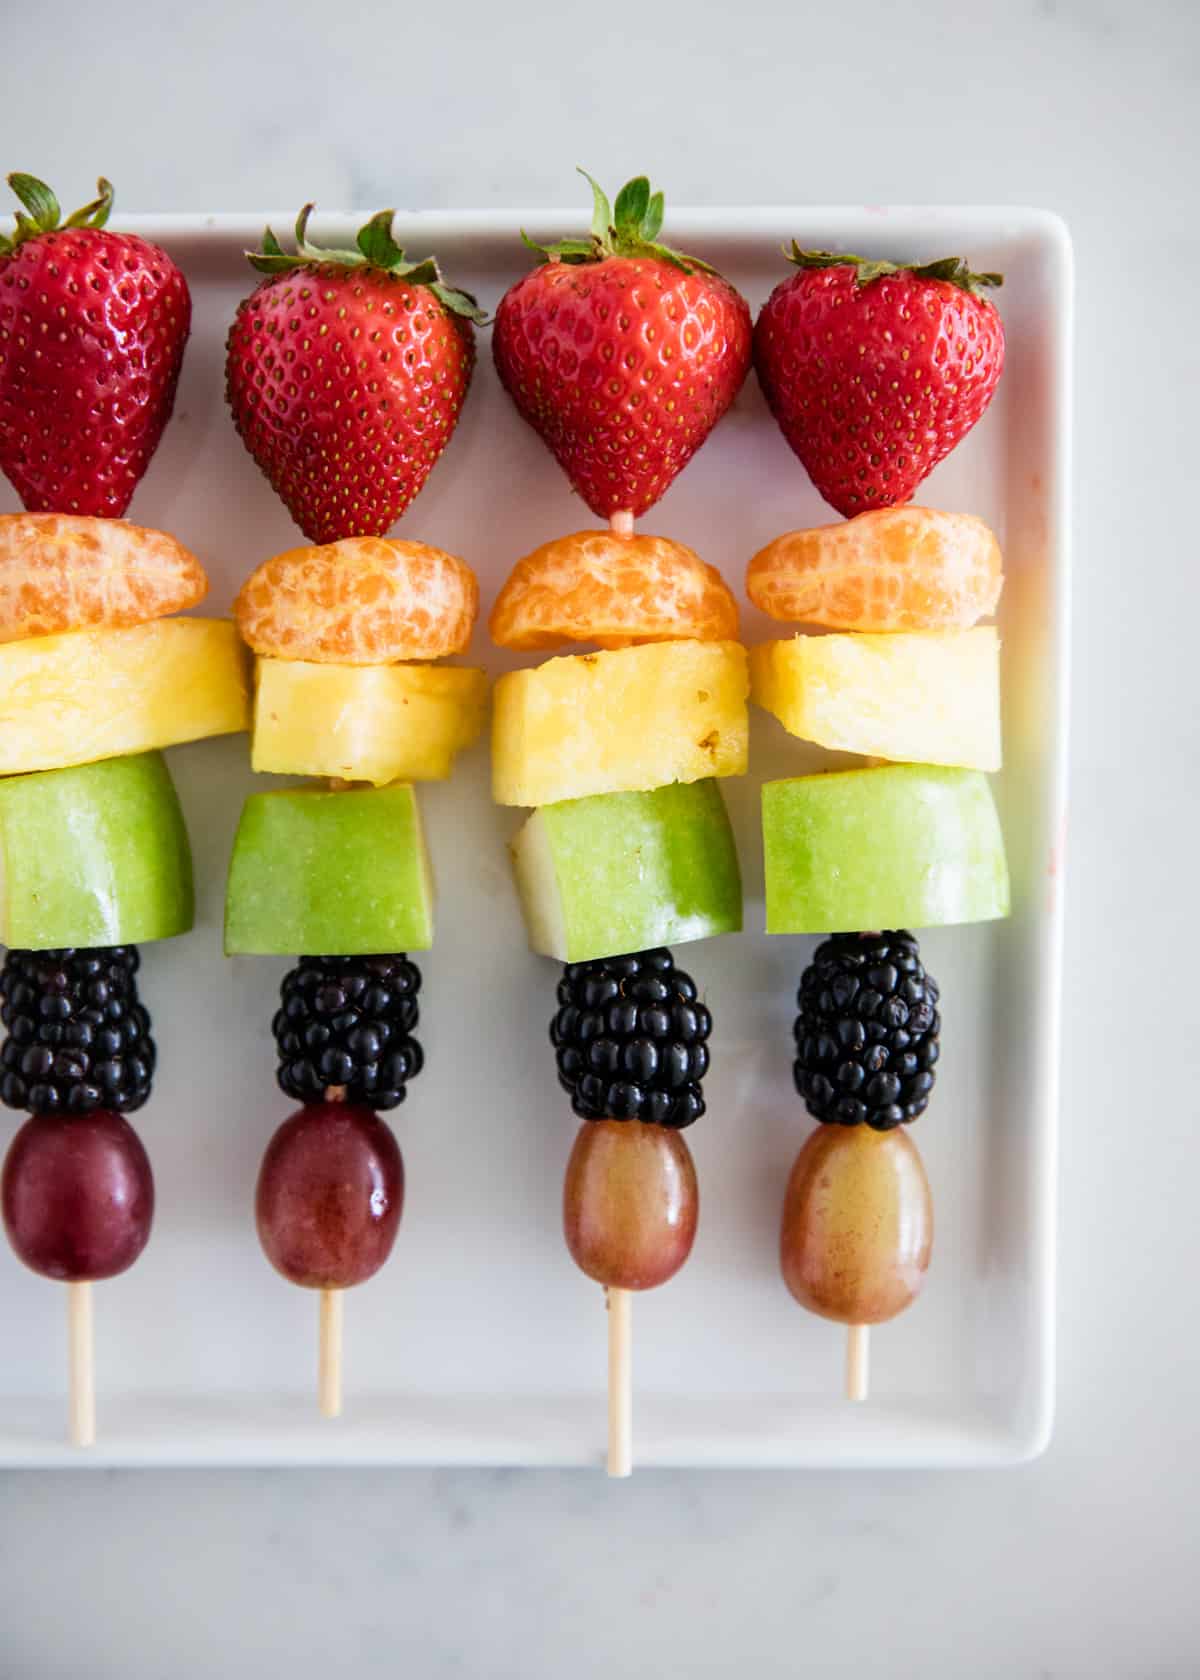 Rainbow fruit kabobs on a white plate.